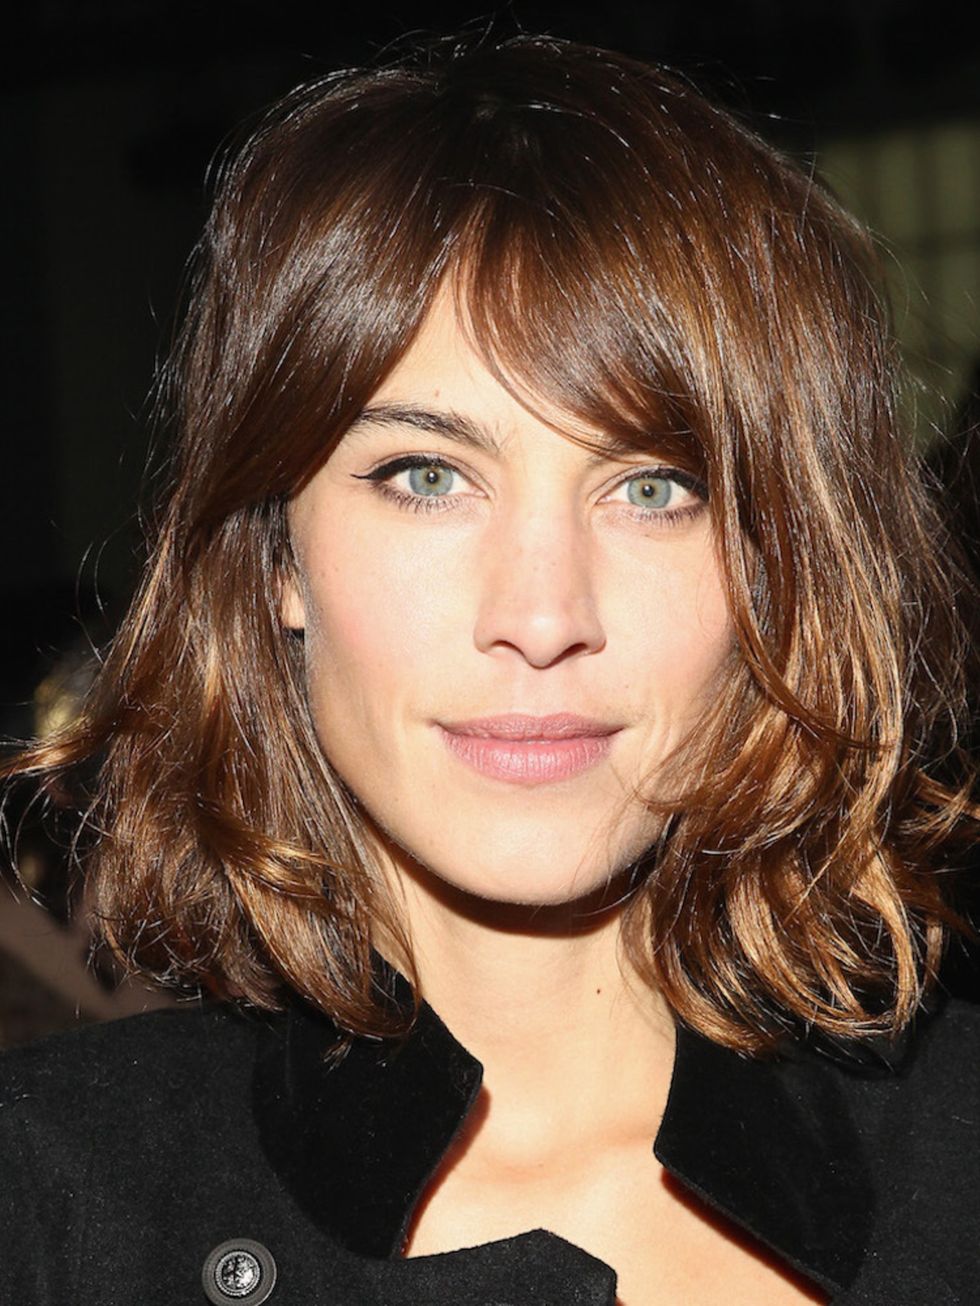 <p><strong>Alexa Chung<br />
Username: chungalexa</strong></p>

<p>Why follow? Follow our beloved Elle cover girl for hilarious selfies, behind the scenes looks at the most coveted fashion events, and occasional glimpses of an off-duty Nick Grimshaw.</p>